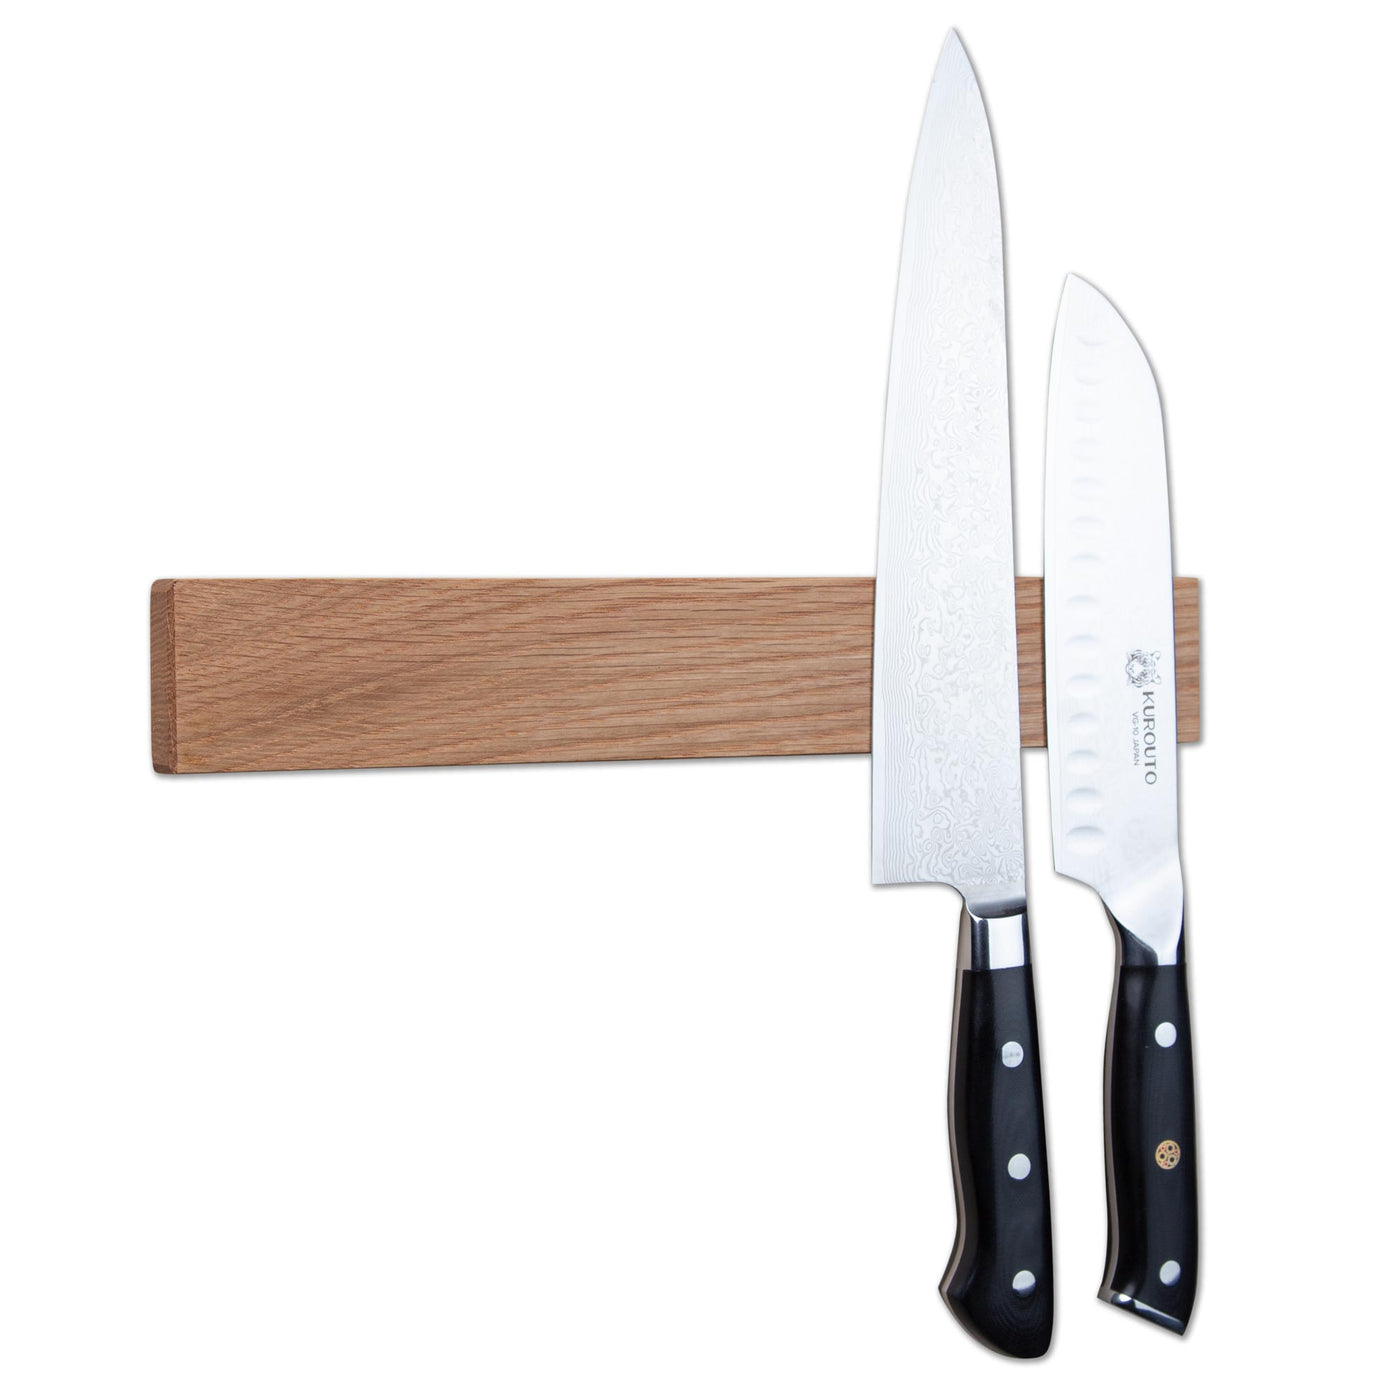 Kurouto Kitchenware White Oak Magnetic Knife Block -12 Inch -Made in the USA